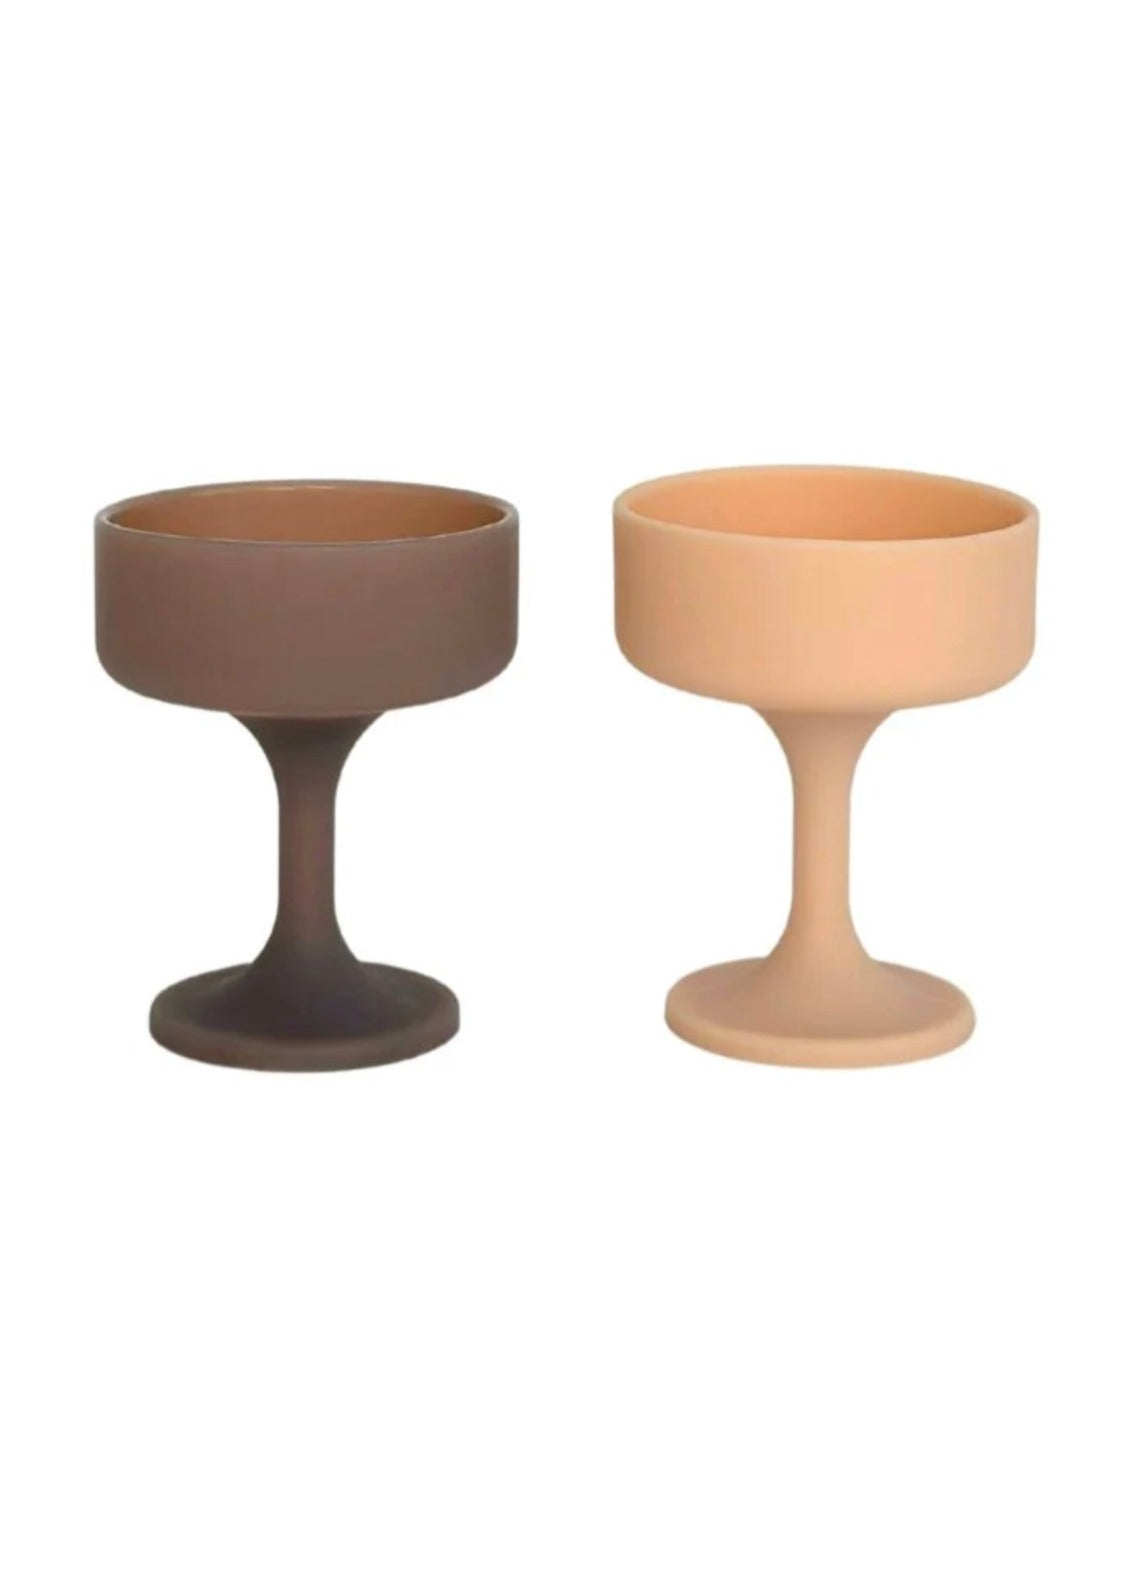 Latte + Donkey | Mecc | Silicone Unbreakable Cocktail Glasses